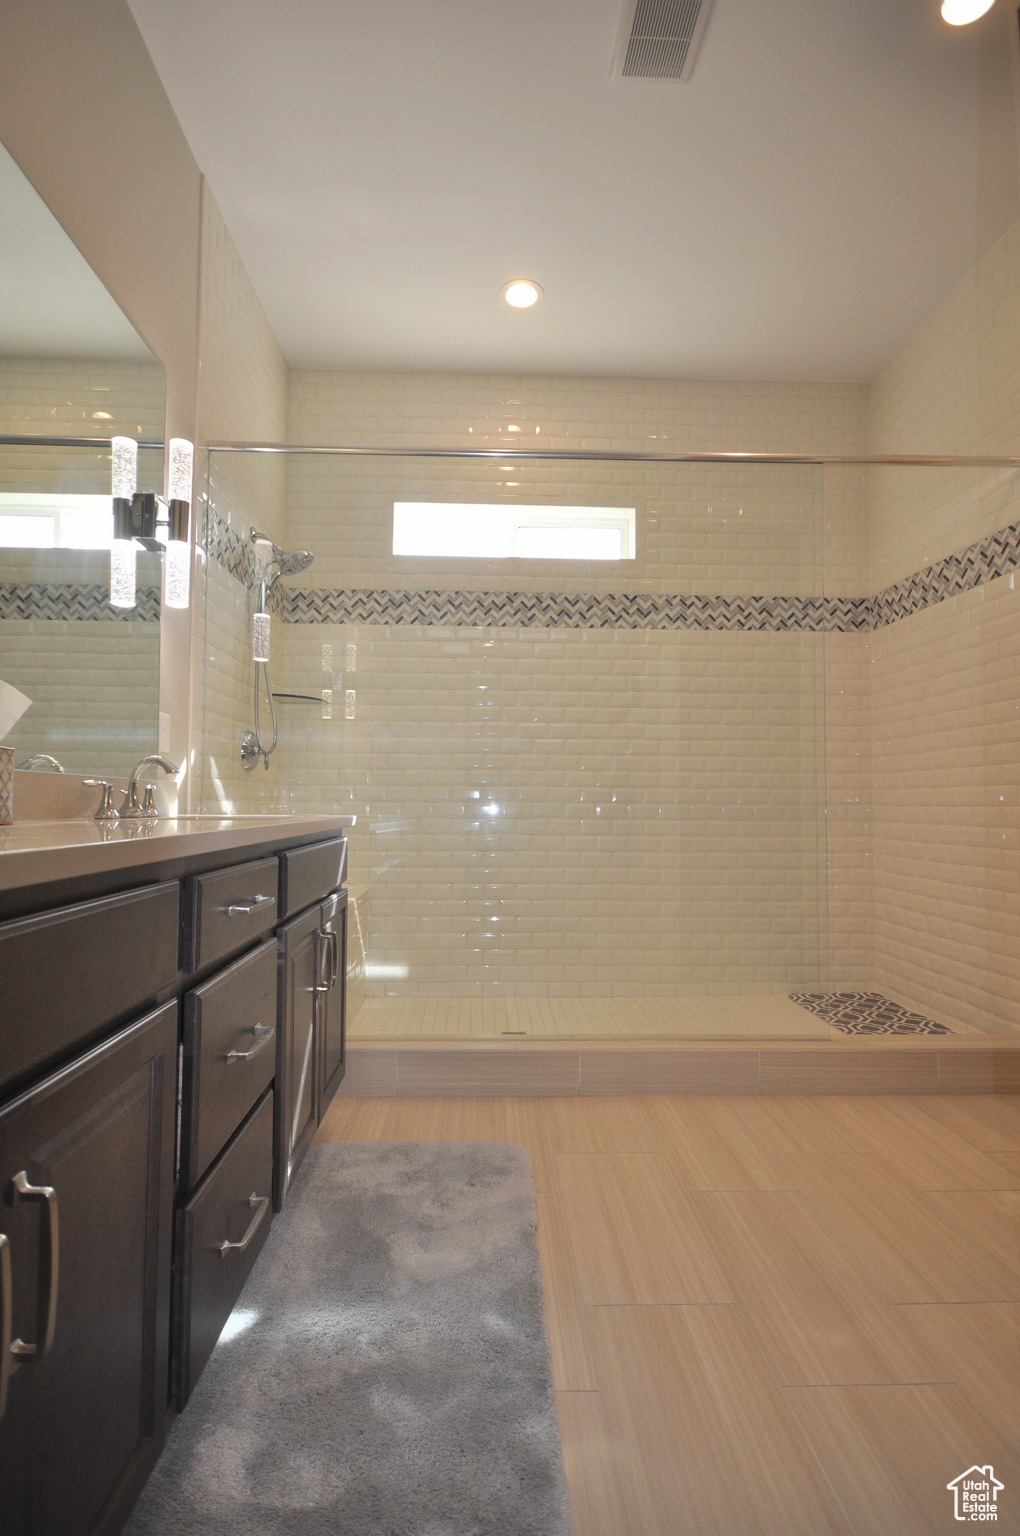 Bathroom with tile floors, vanity, and tiled shower